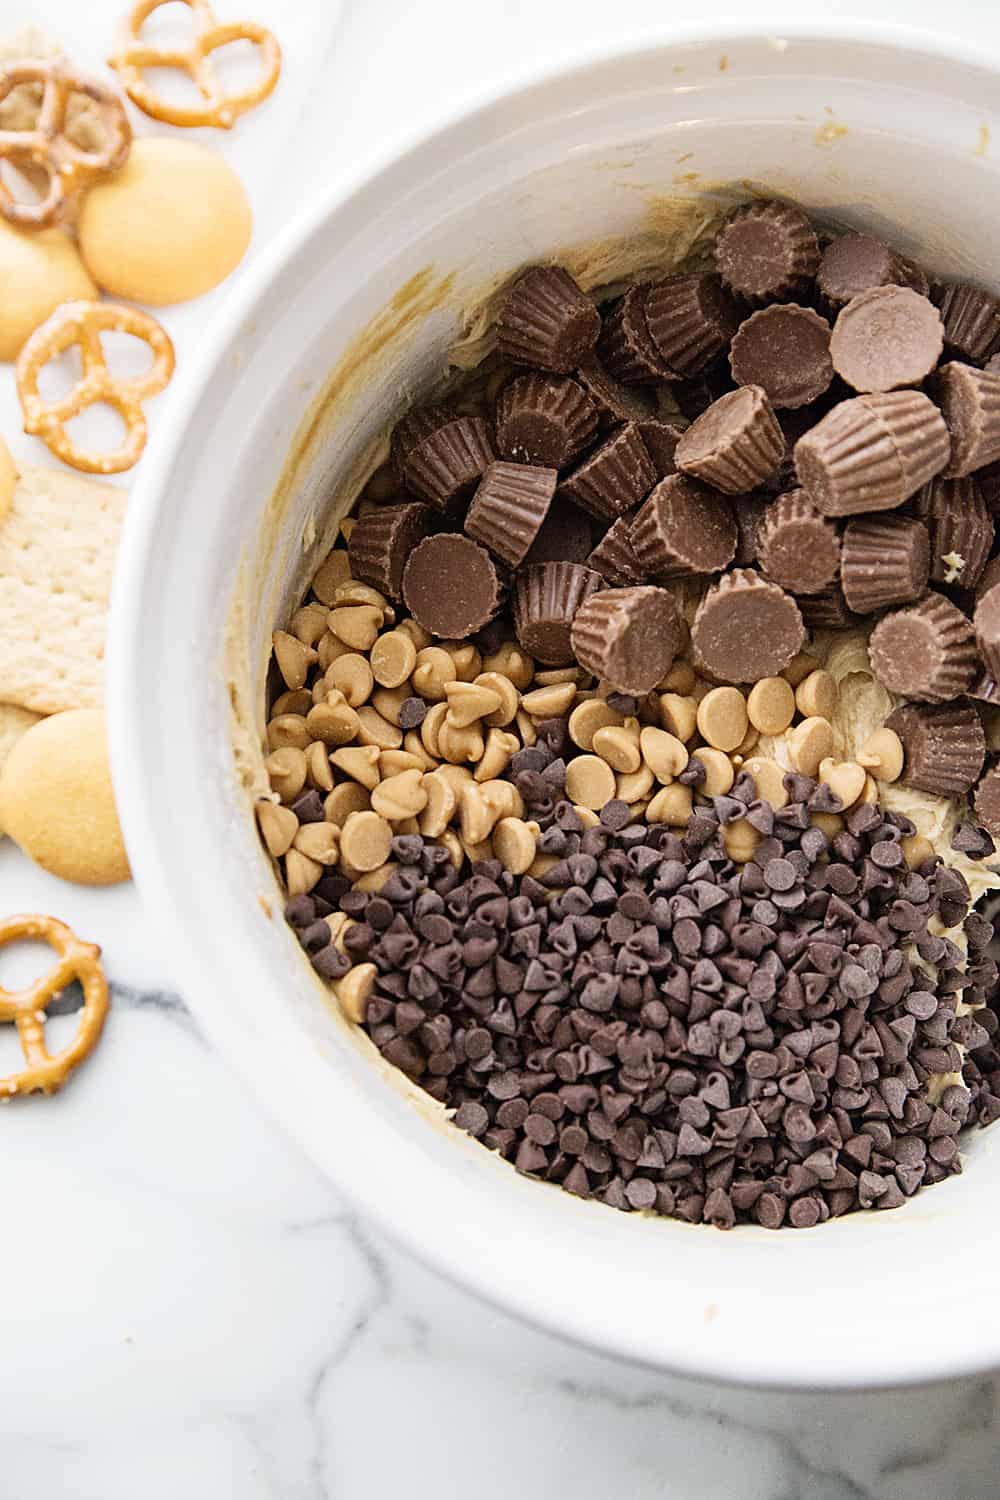 Peanut Butter Cookie Dough Dip ingredients in a bowl.